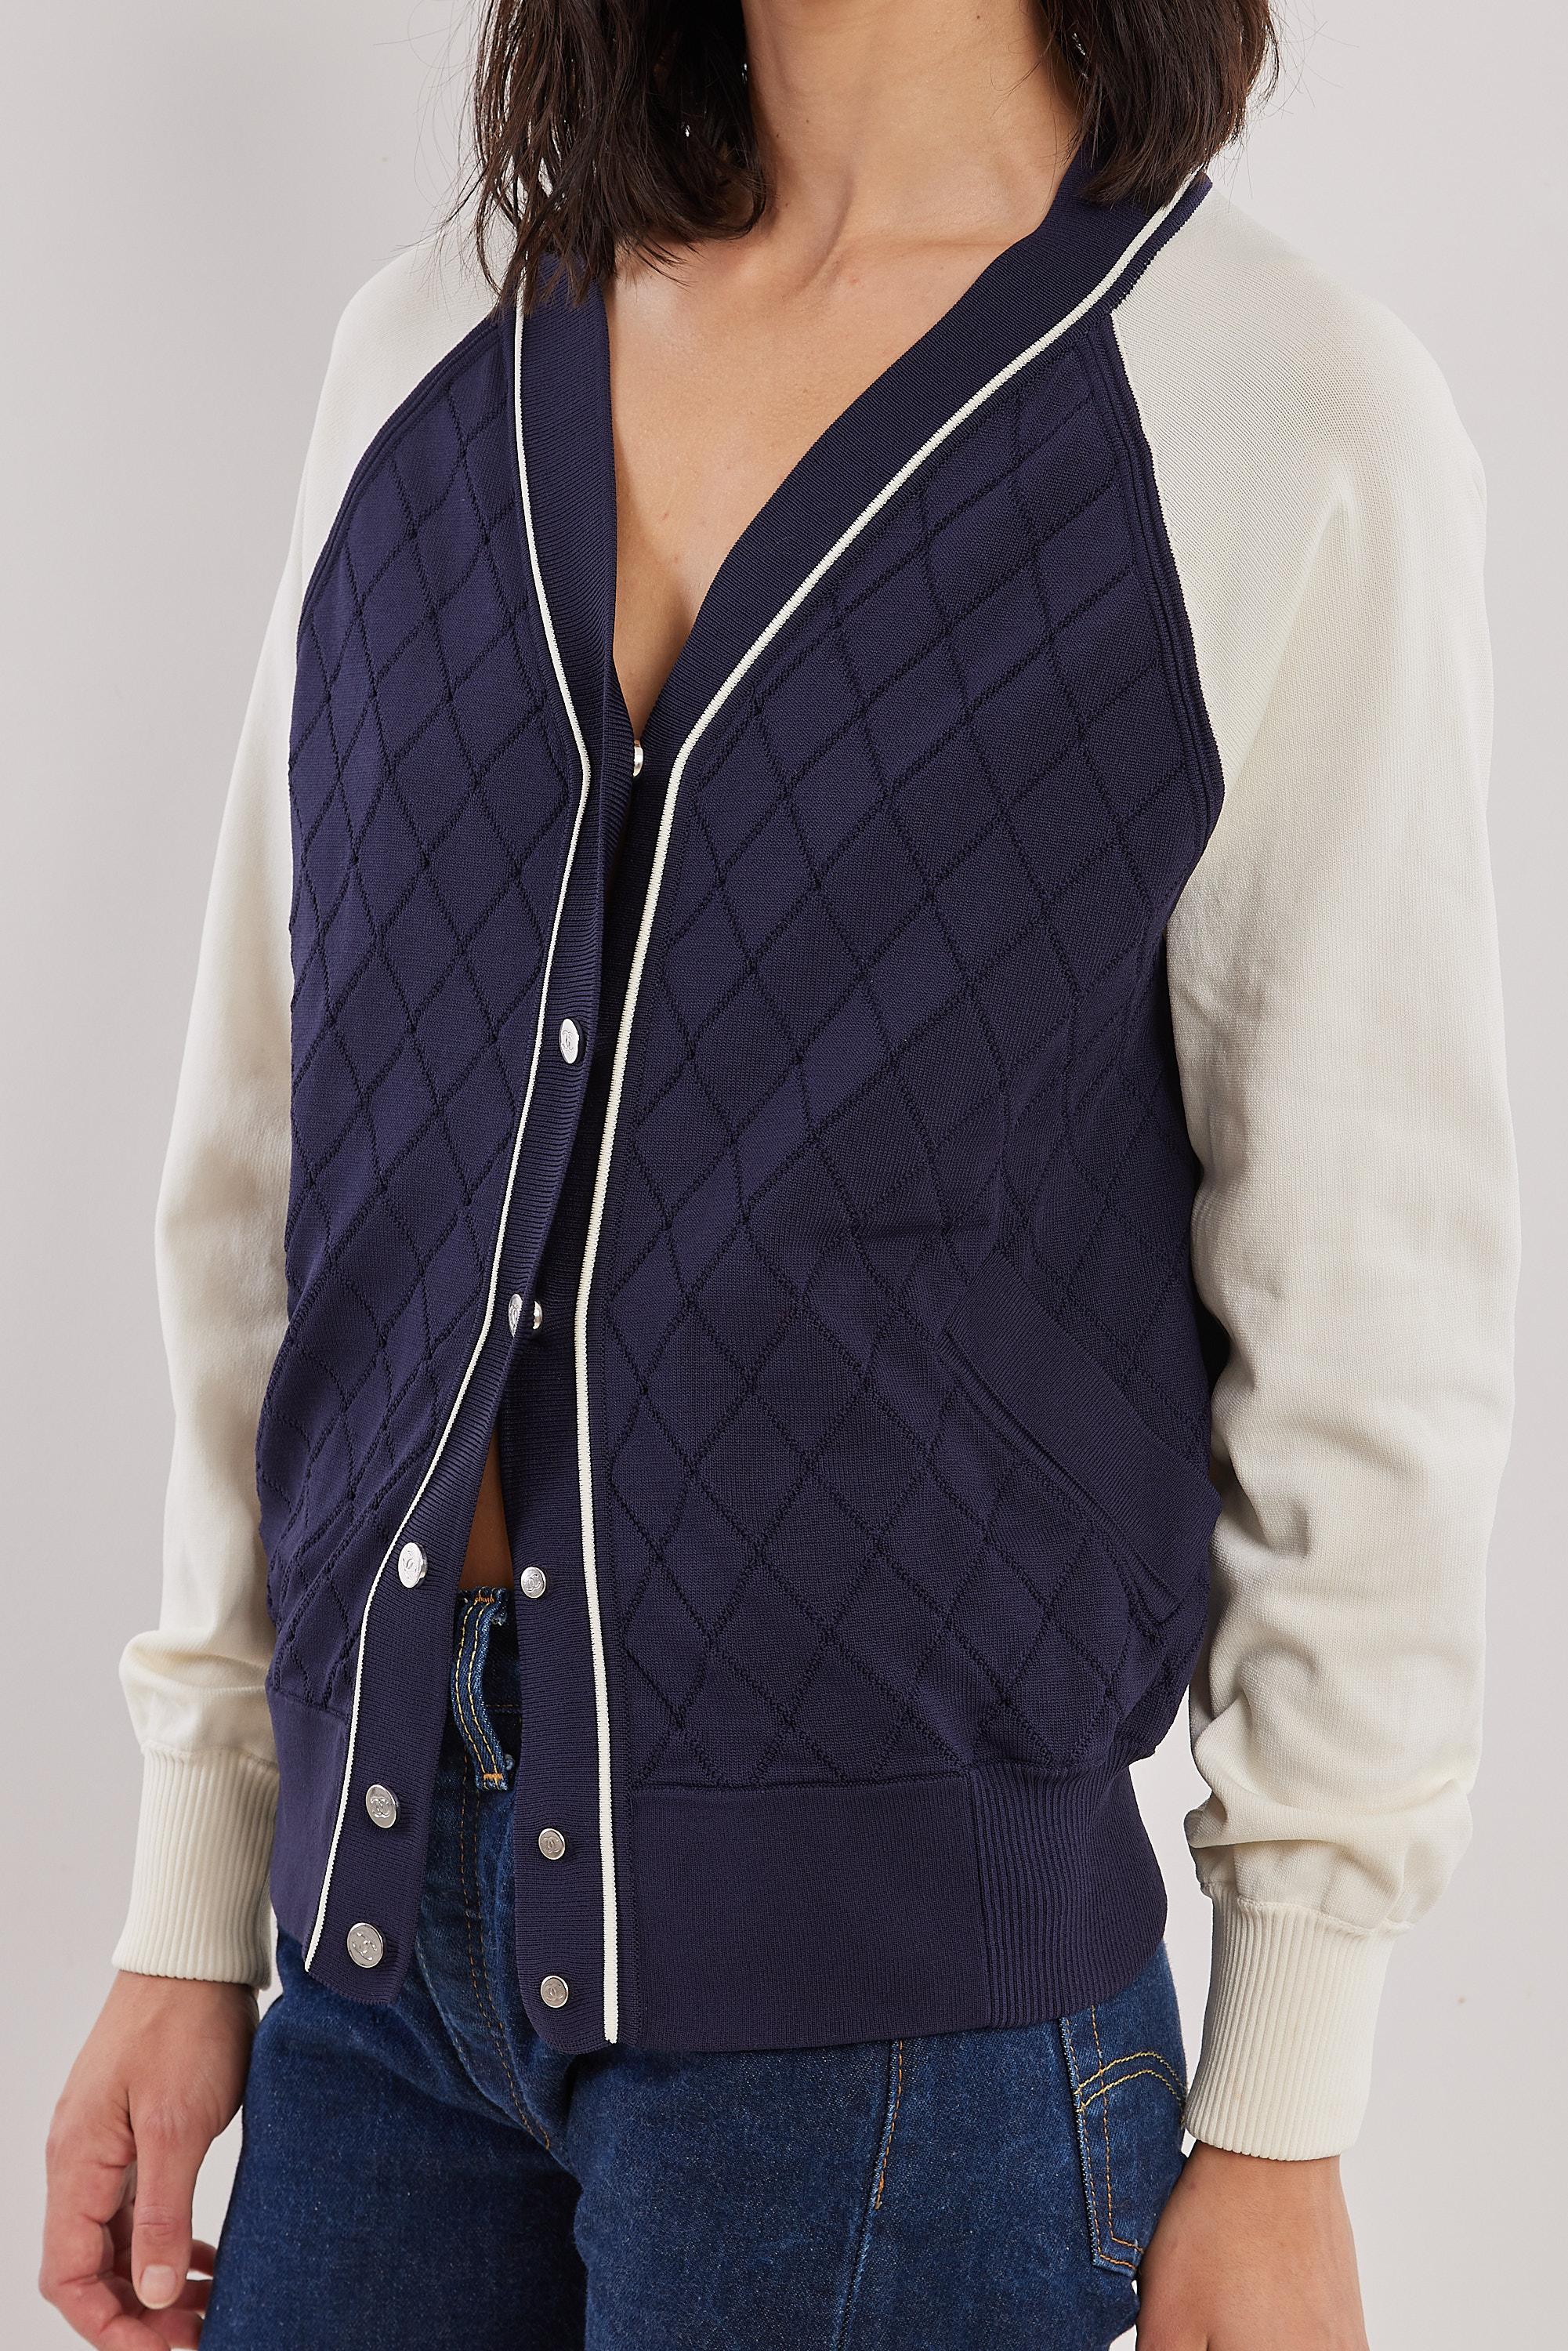 Women's or Men's Chanel 2019 Pre-Spring quilted varsity bomber jacket For Sale